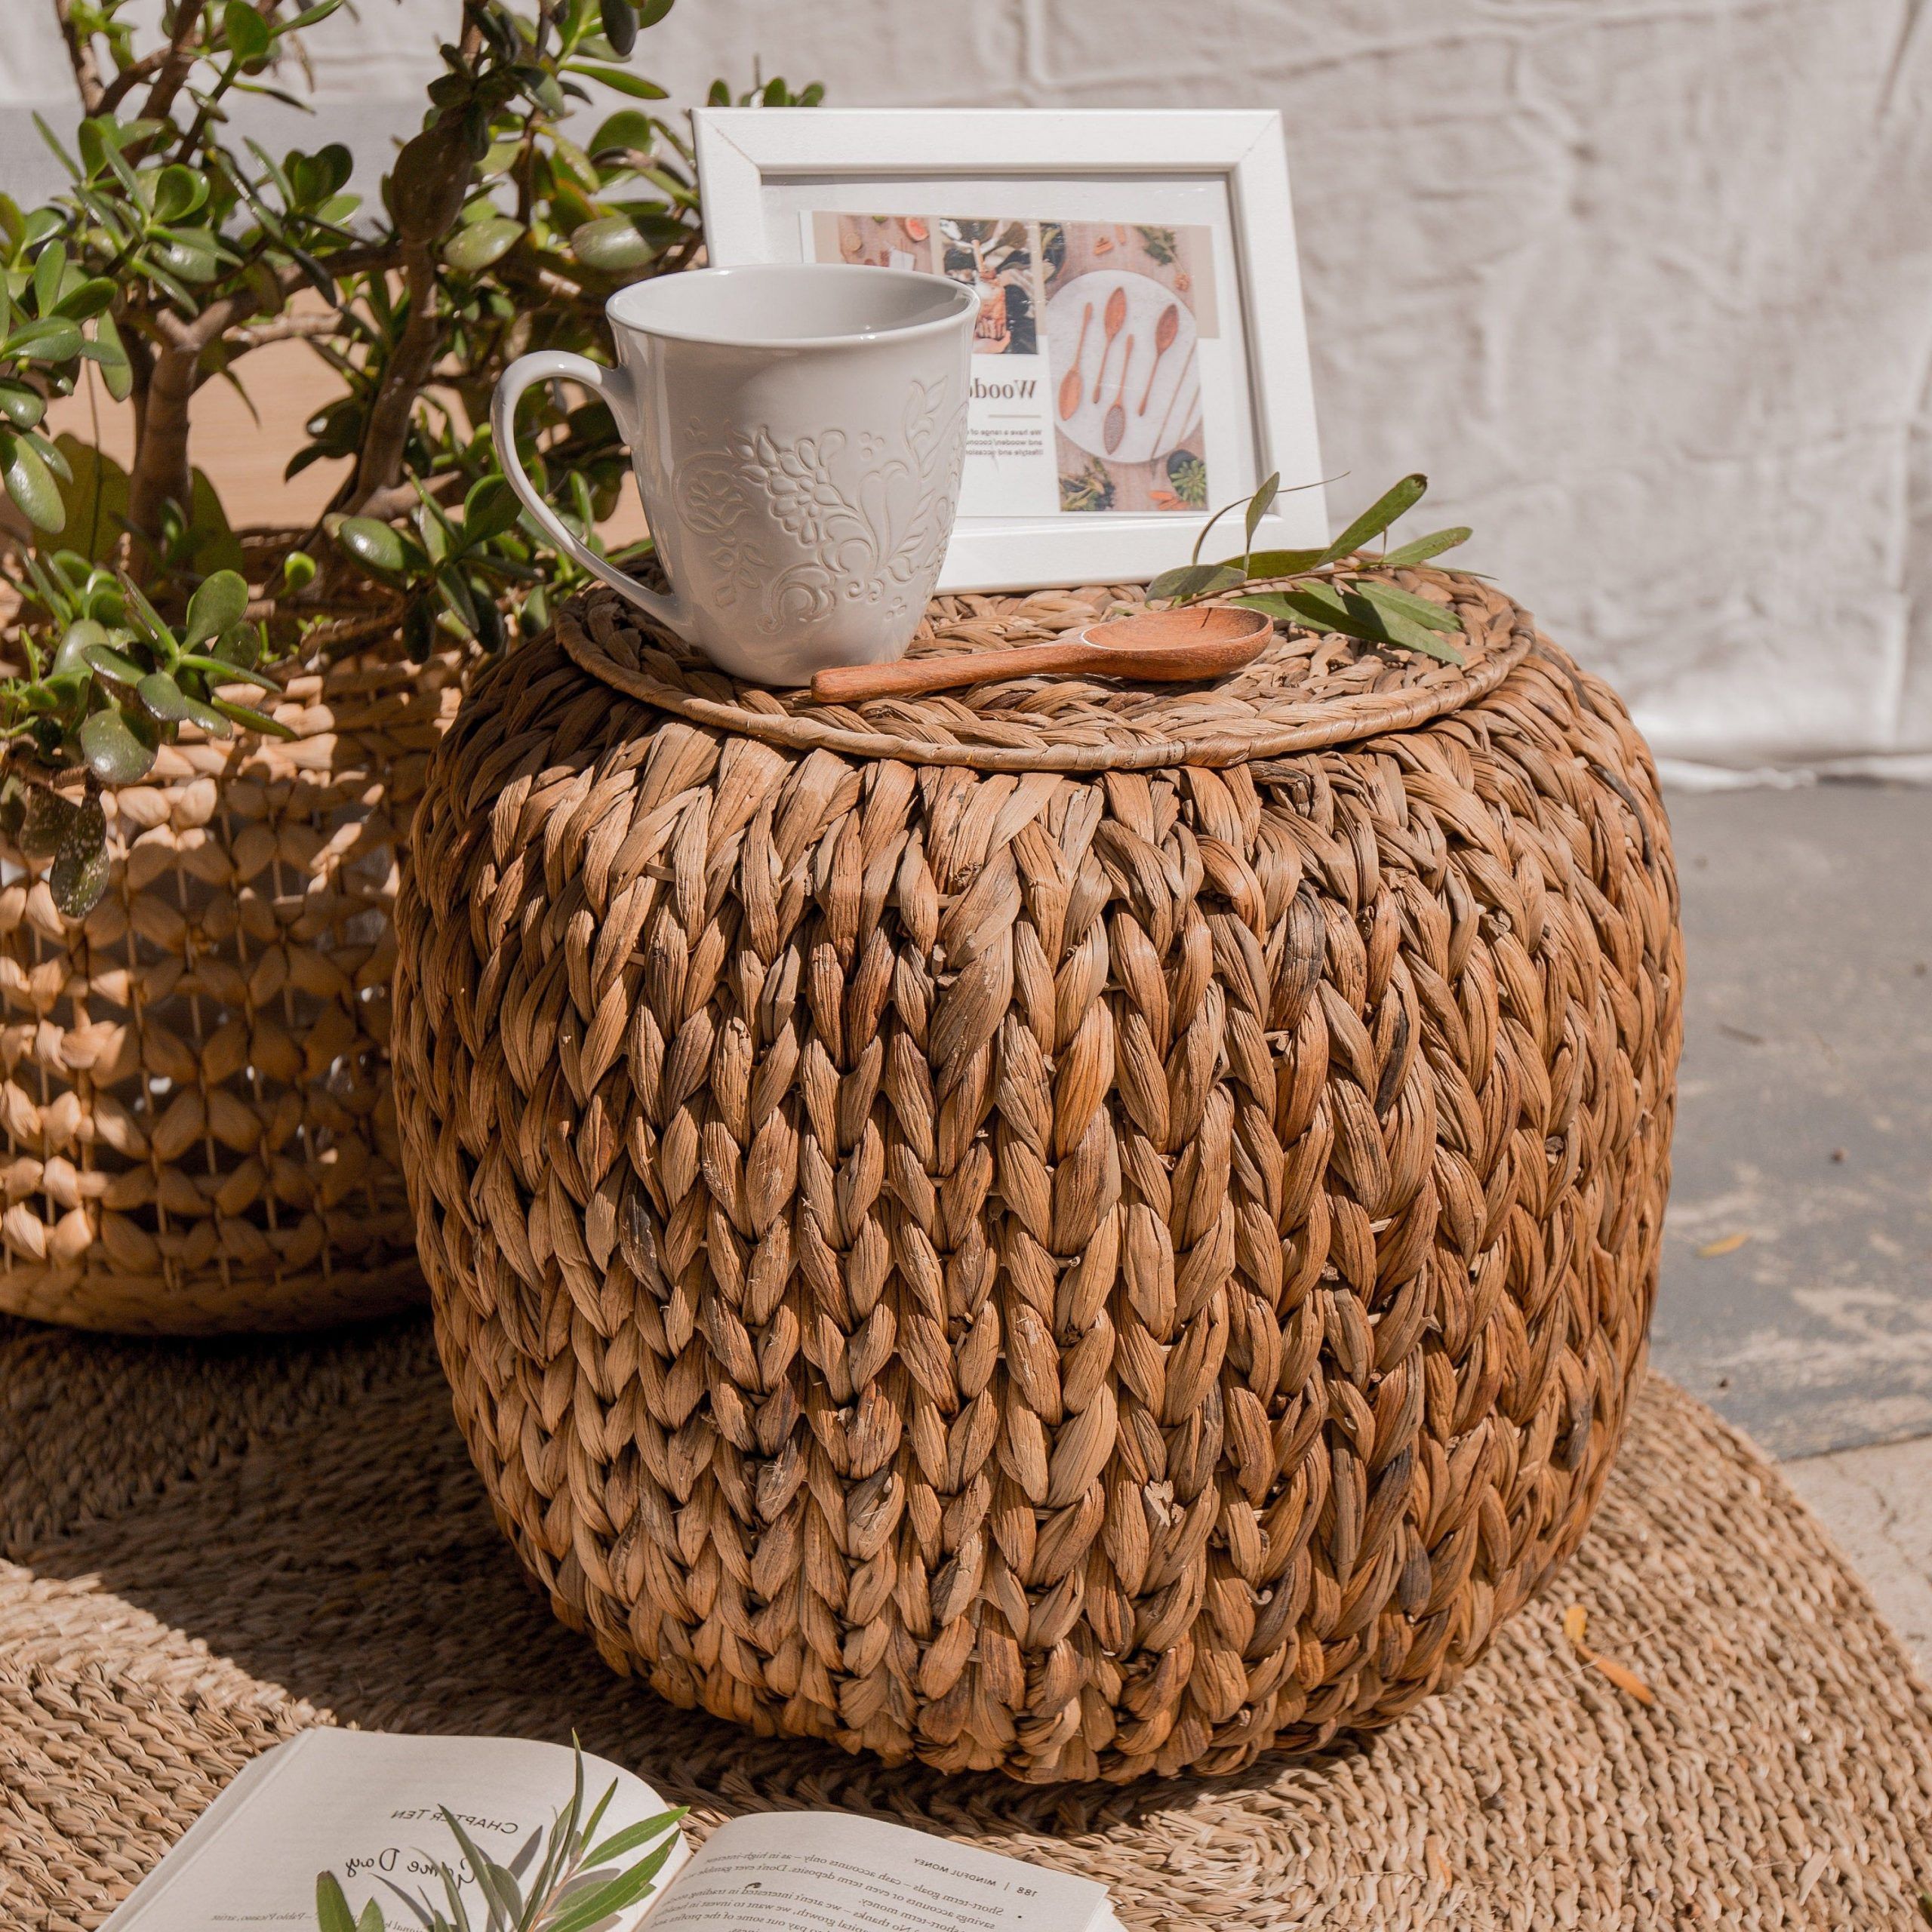 2018 Hand Woven Rattan Storage Barrel, Seagrass Ottoman With Lid, Natural Pertaining To Traditional Hand Woven Pouf Ottomans (View 3 of 10)